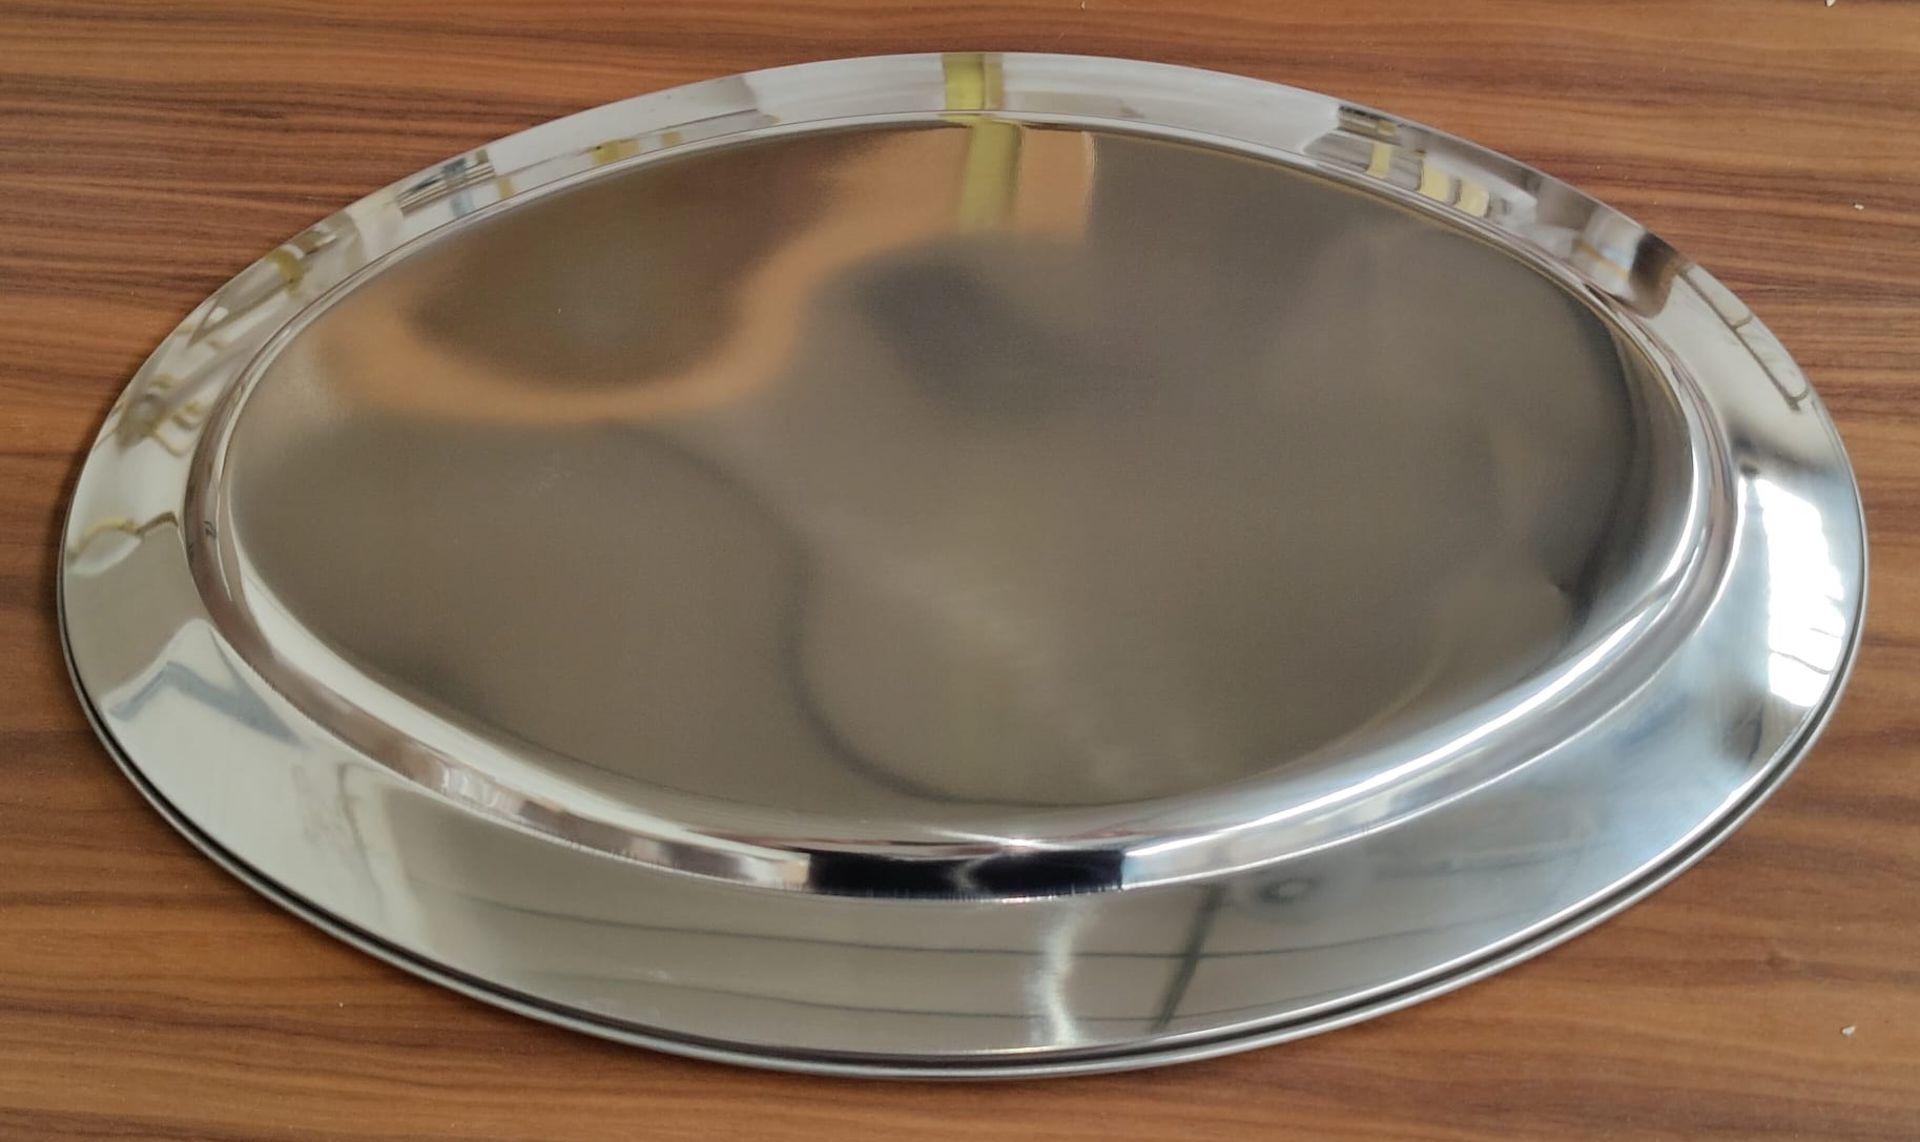 20 x Stainless Steel Oval Service Trays - Size: 450mm x 310mm - Brand New Boxed Stock - RRP £200 - Image 5 of 8